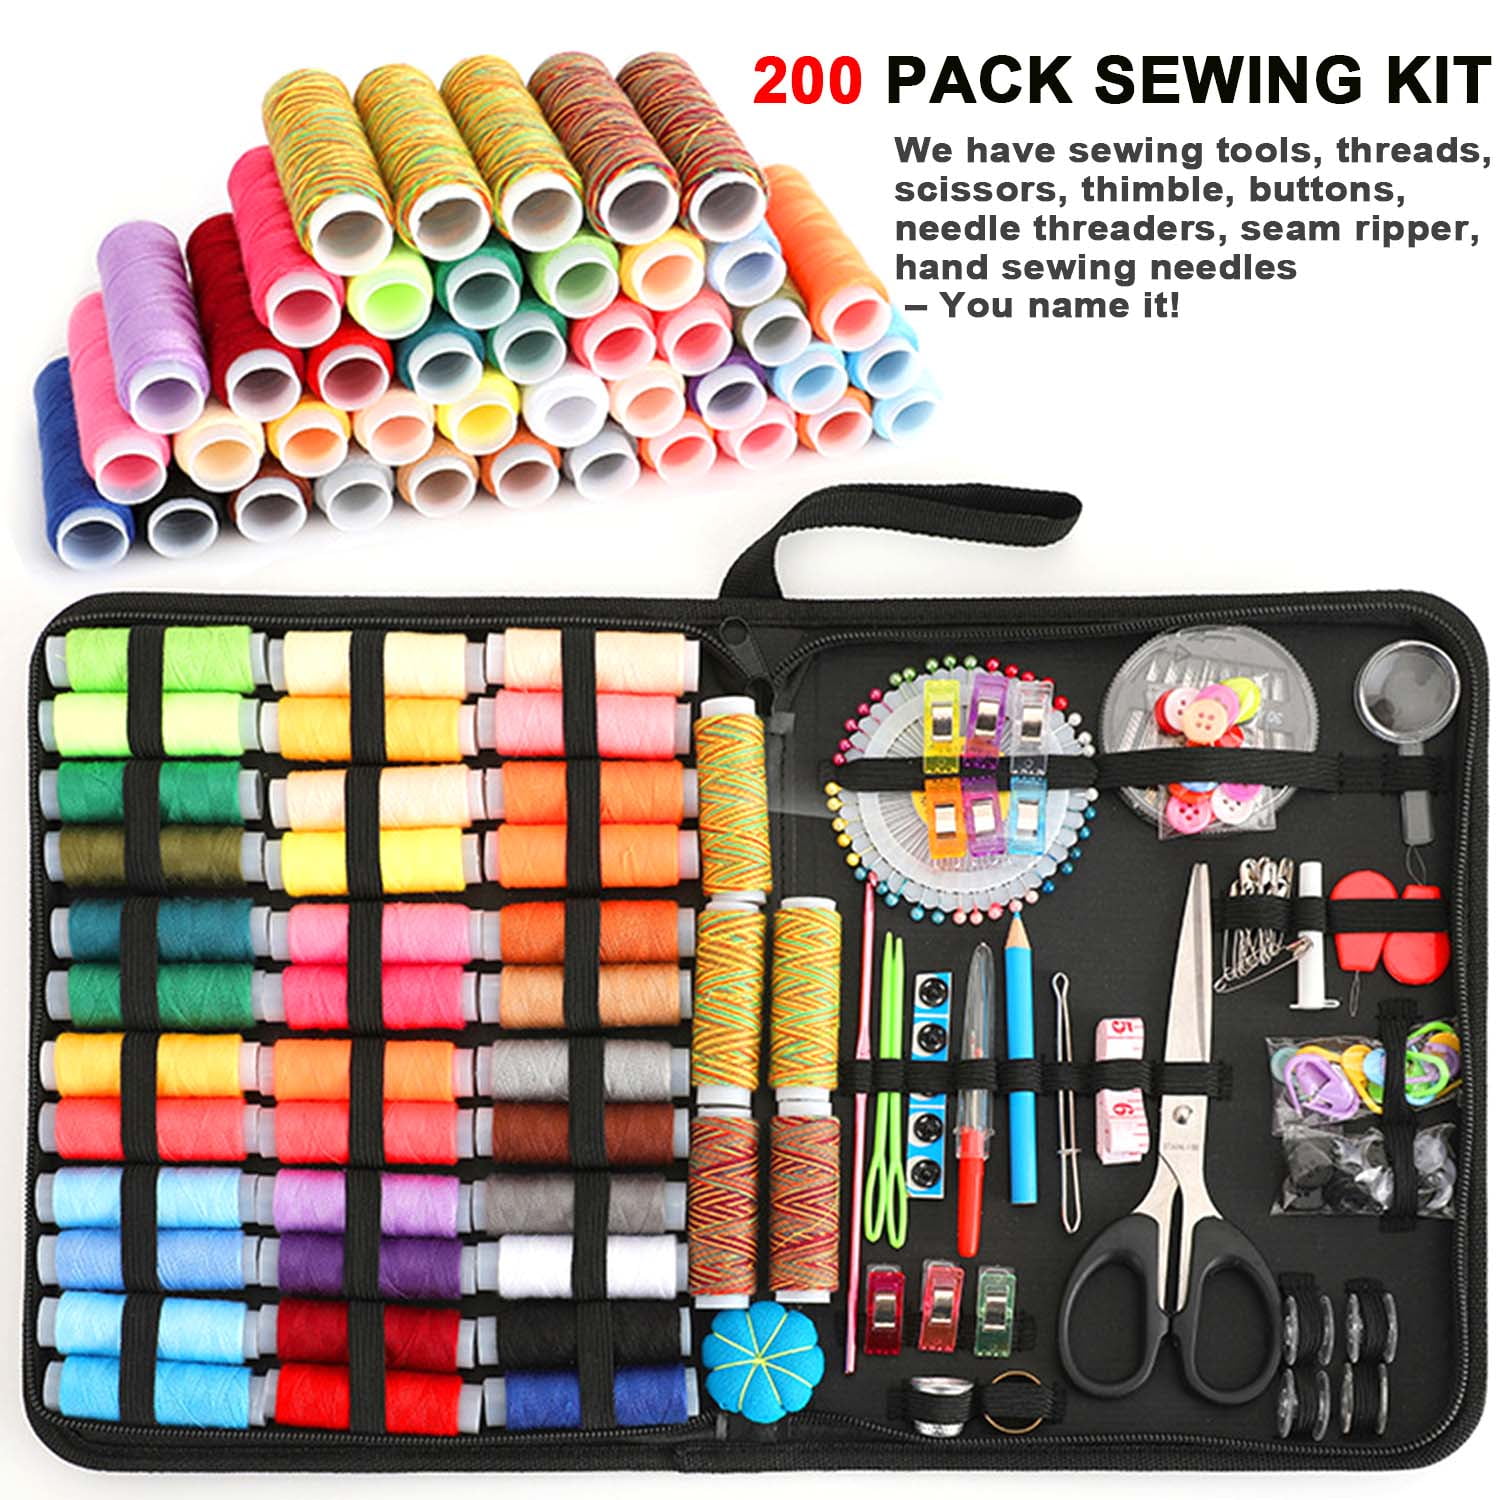 104 Pcs Premium Sewing Kit, Portable Needle and Thread Kit for Beginners,  Travelers and Adults, DIY Sewing Supplies with 18 Color Threads, 24  Needles, Seam Ripper, Scissors, Thimble etc